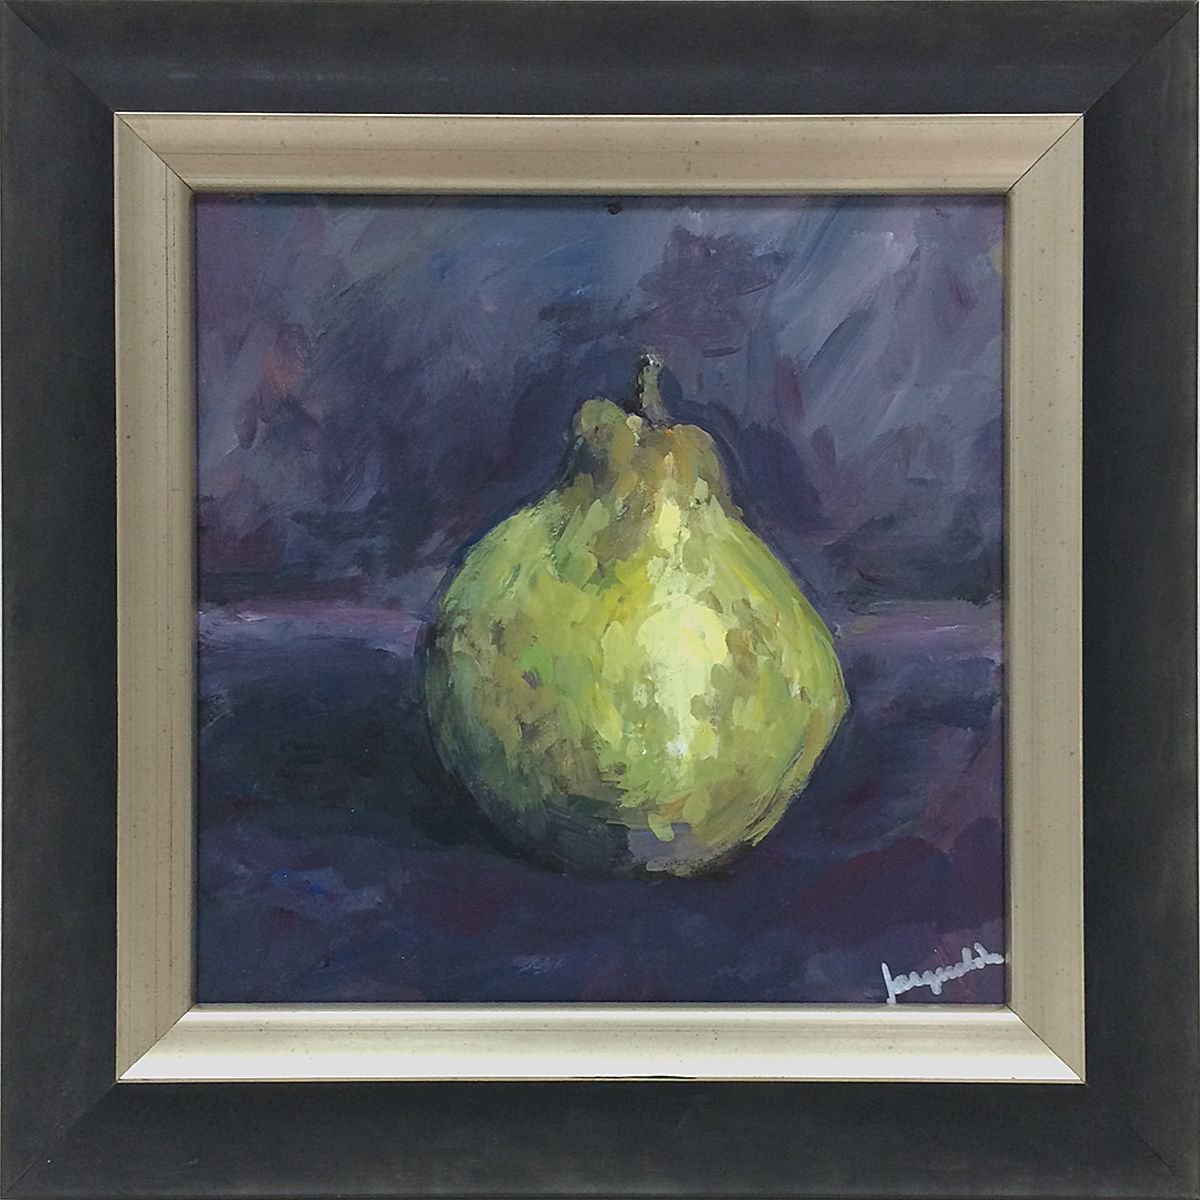 Little pear in purple by Jacqualine Zonneveld